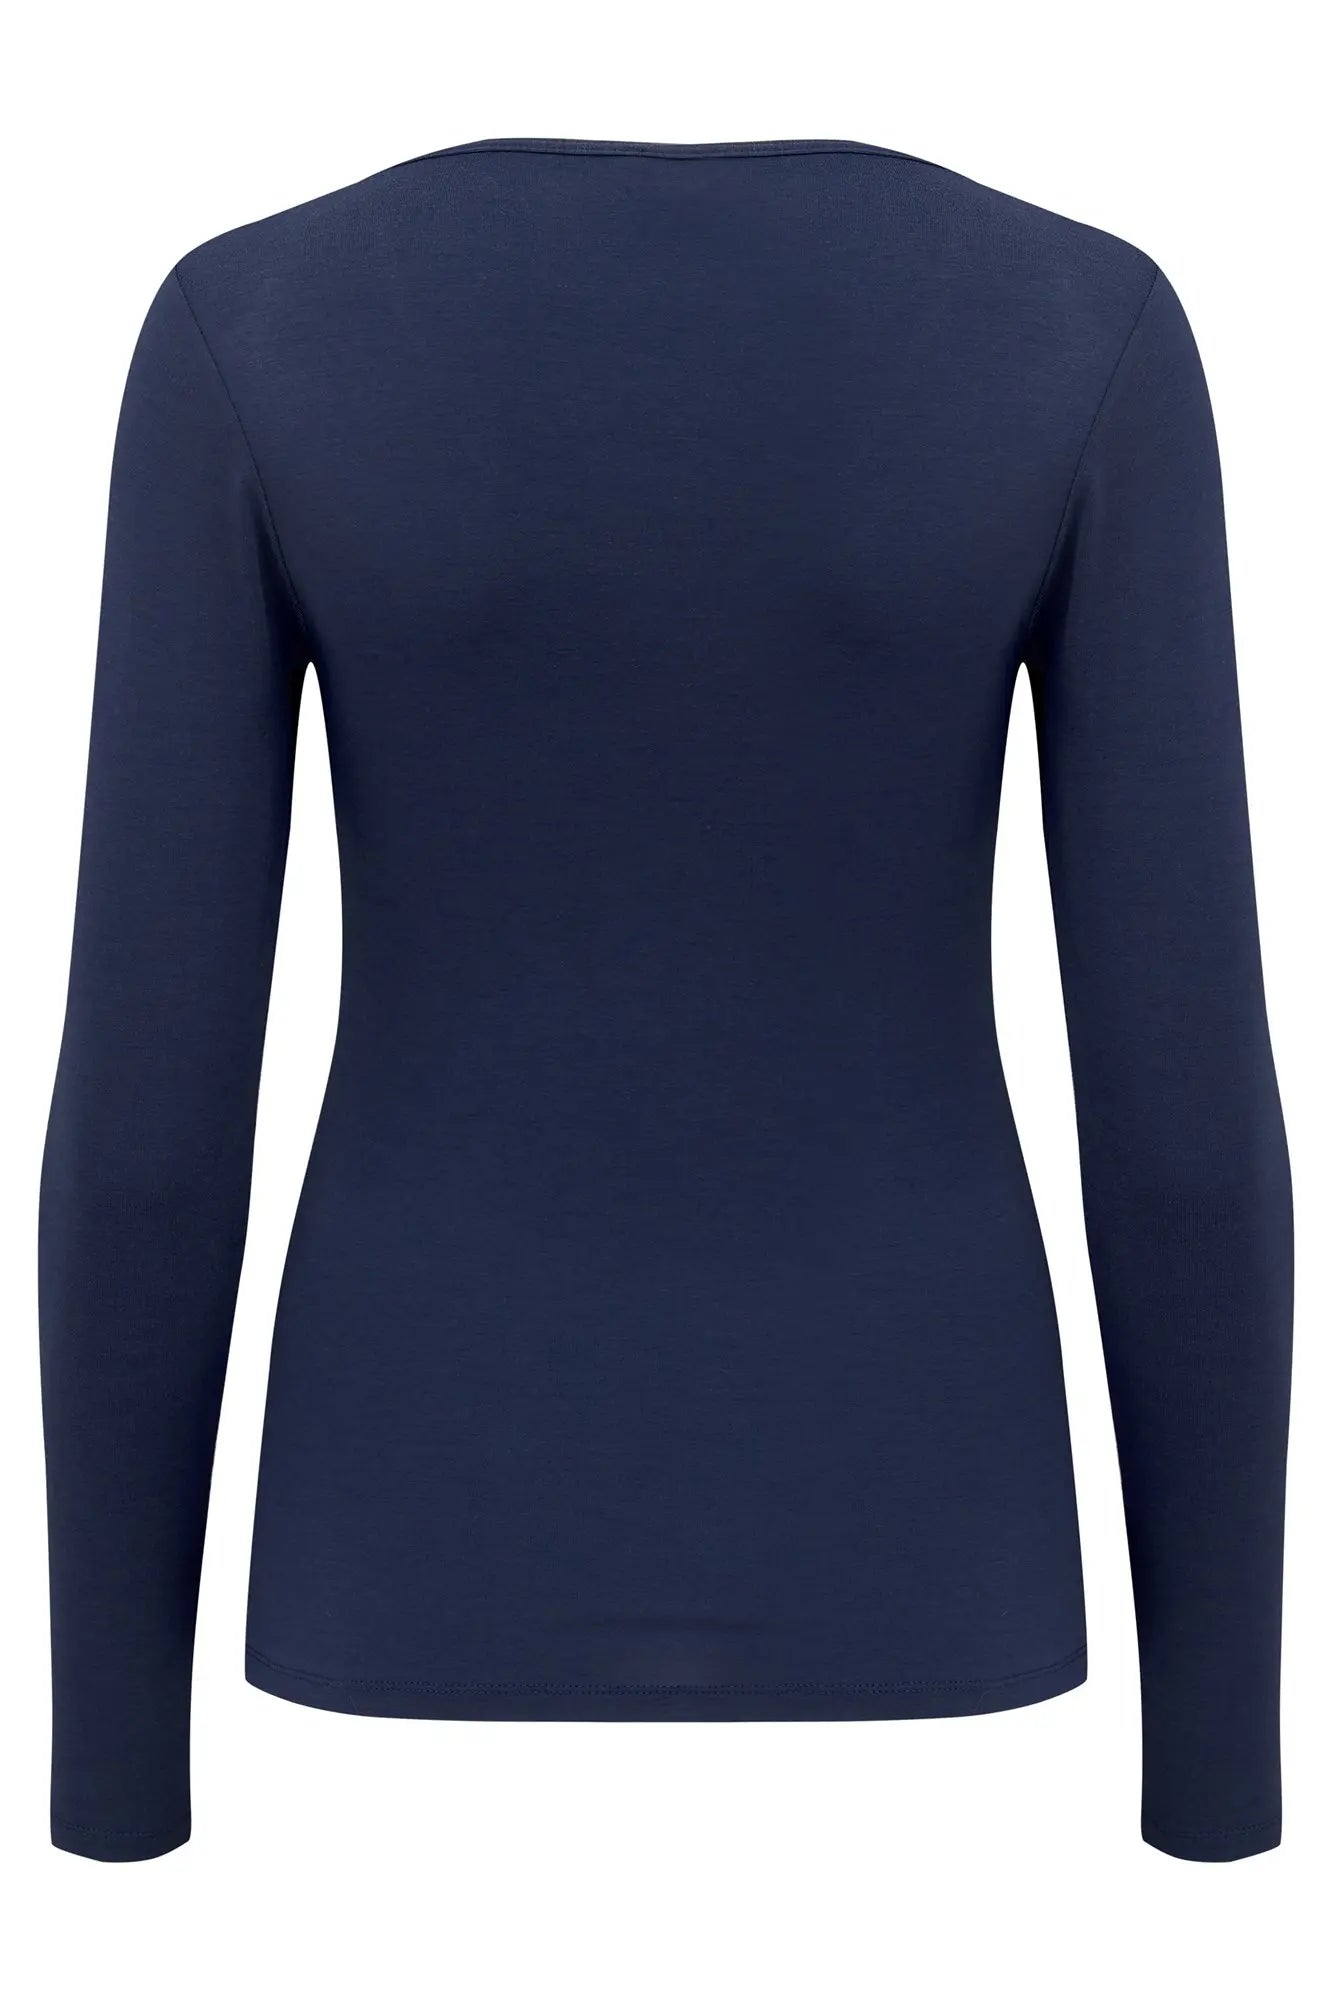 Pour Moi-Thermal Long Sleeve Top-Blue